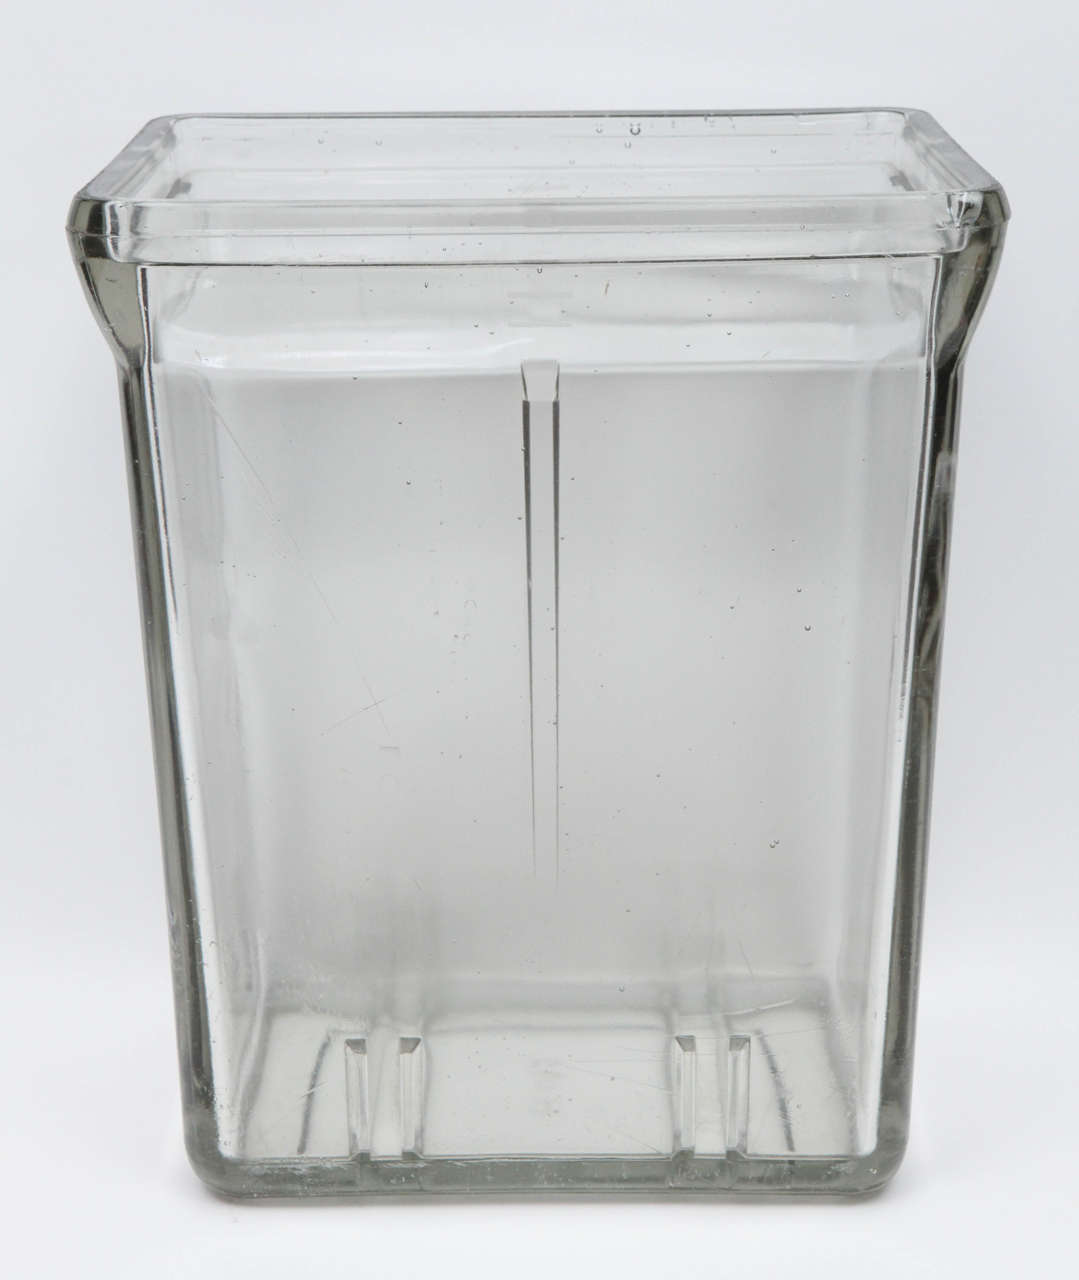 We were thrilled to find this rare large Industrial glass battery case that we assume comes from a larger vehicle like a truck or tractor. We have seen battery jars from this same era but have never seen one this large before. It has a wonderful